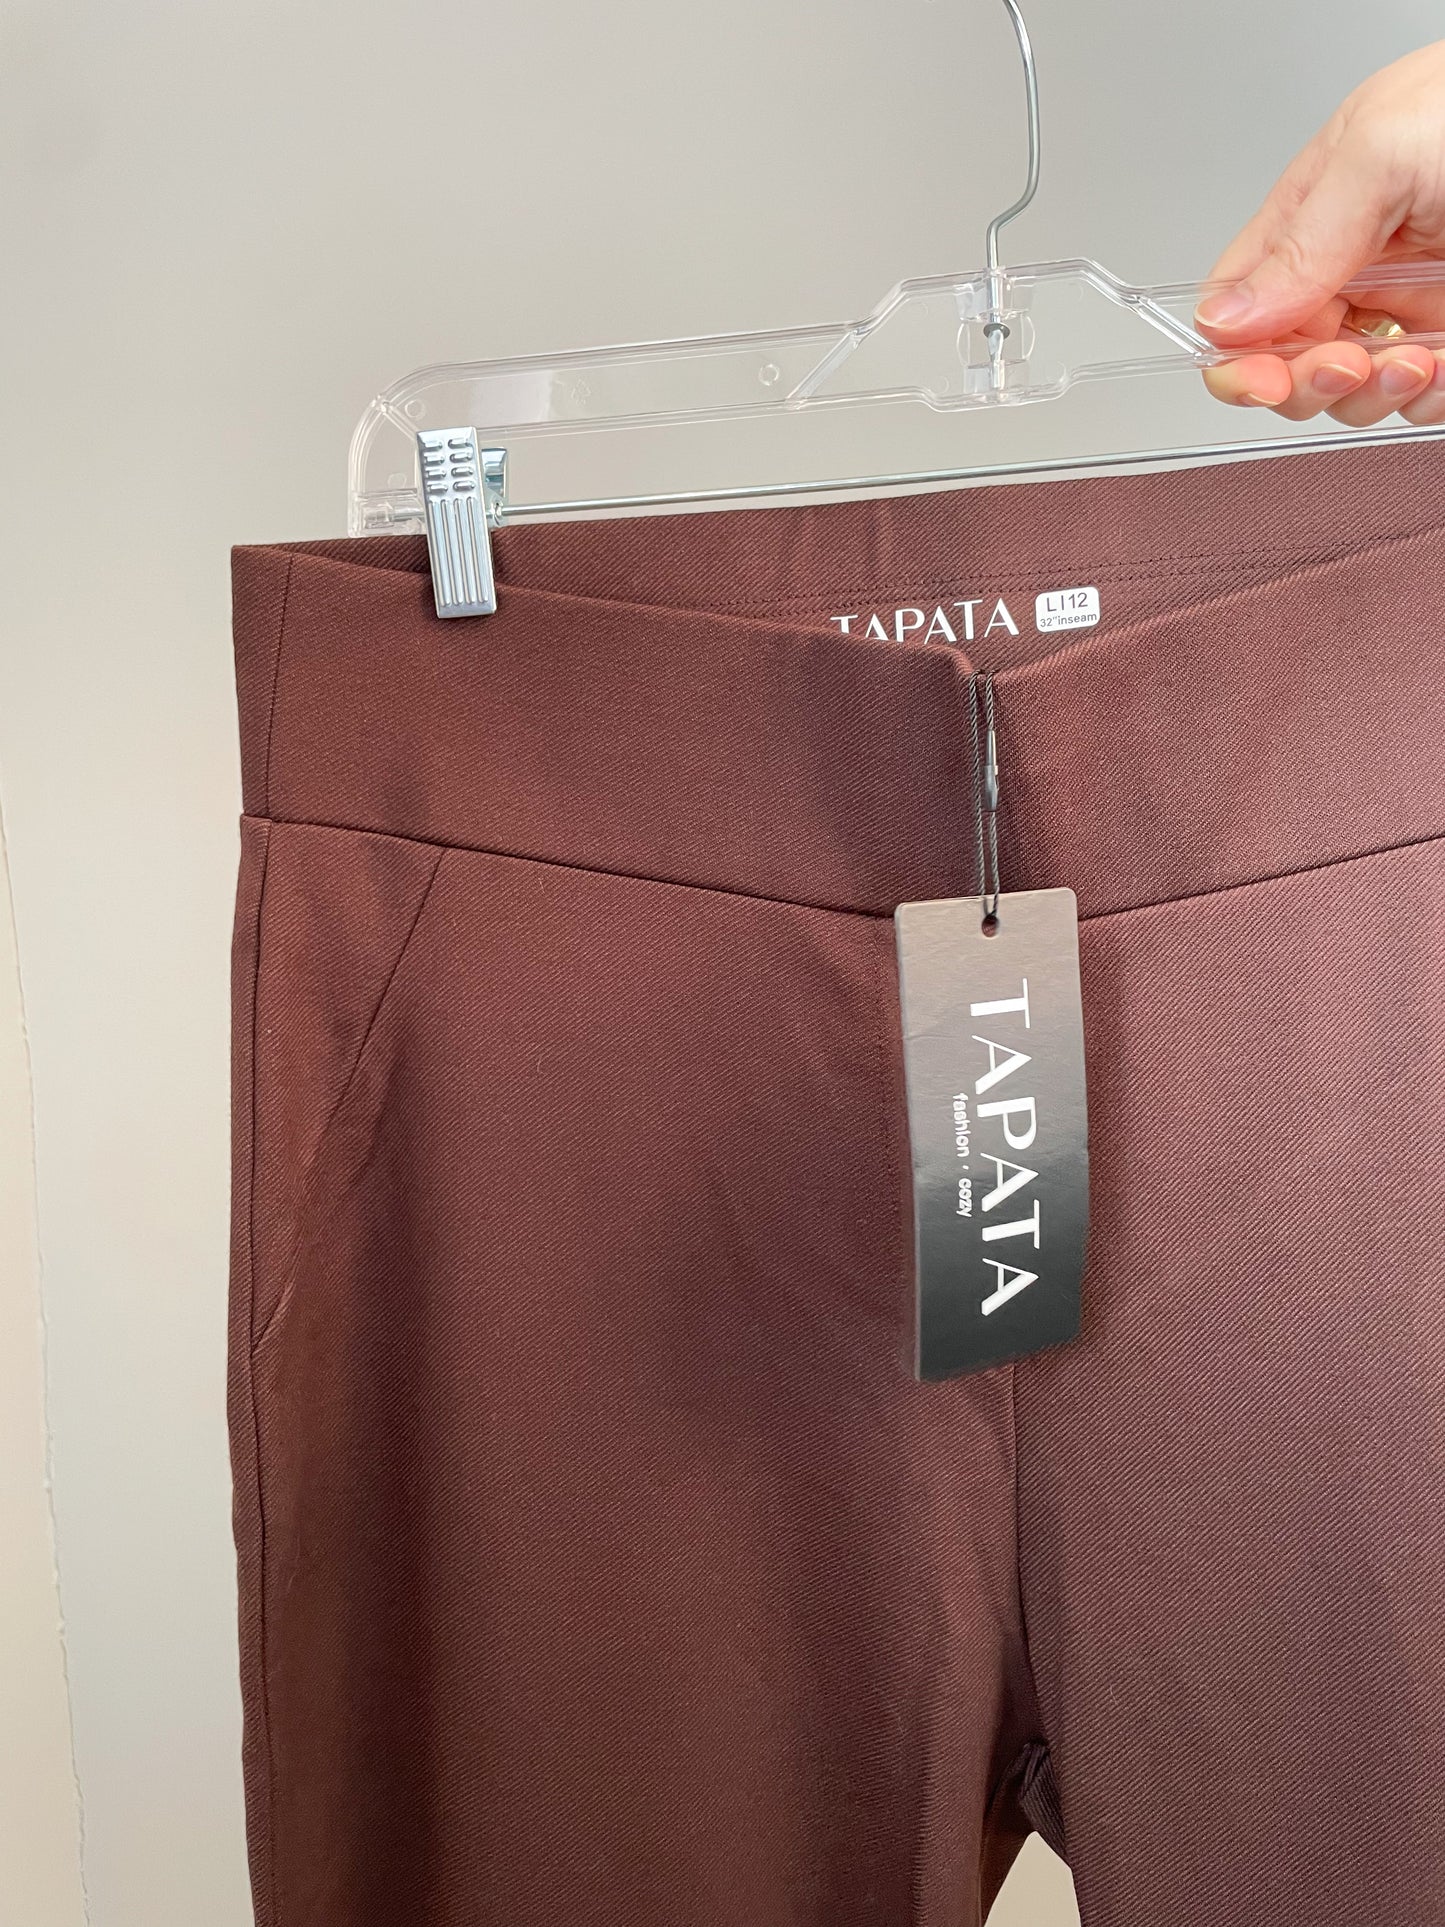 Tapata Brown High Waist Wide Leg Stretch Knit Pants NWT - Size 12 Large